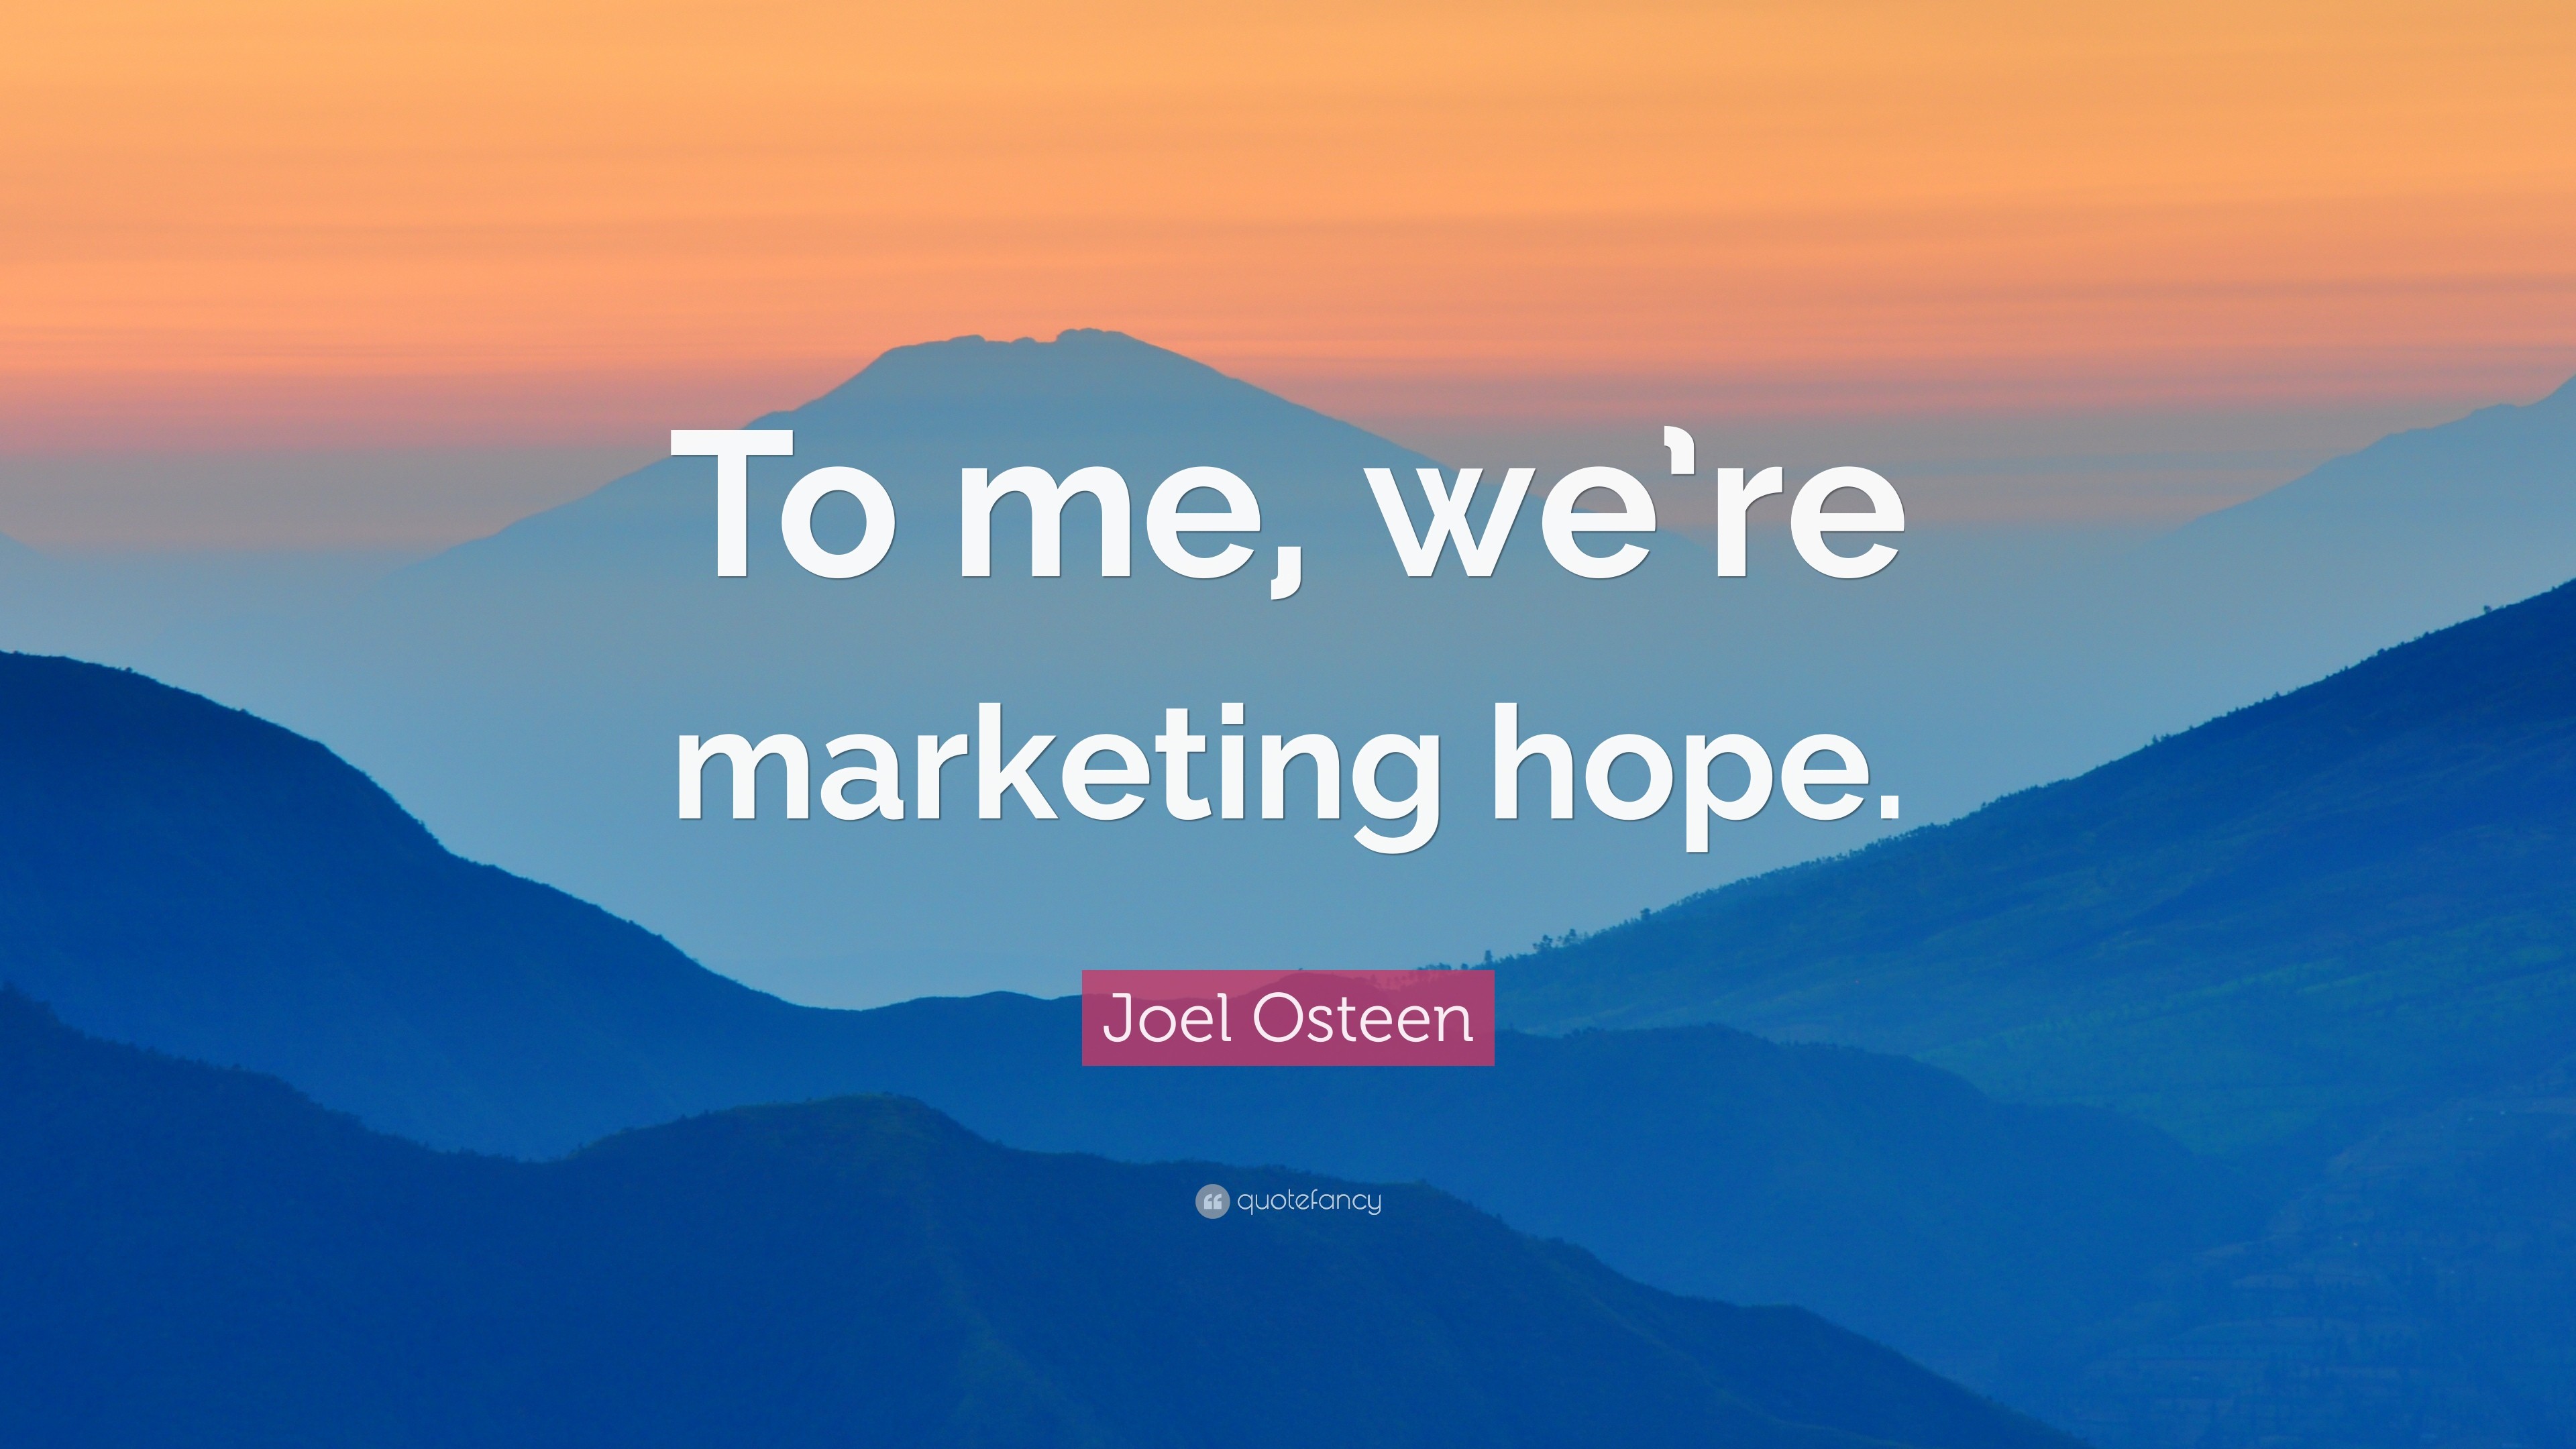 3840x2160 Joel Osteen Quote: “To me, we're marketing hope.”